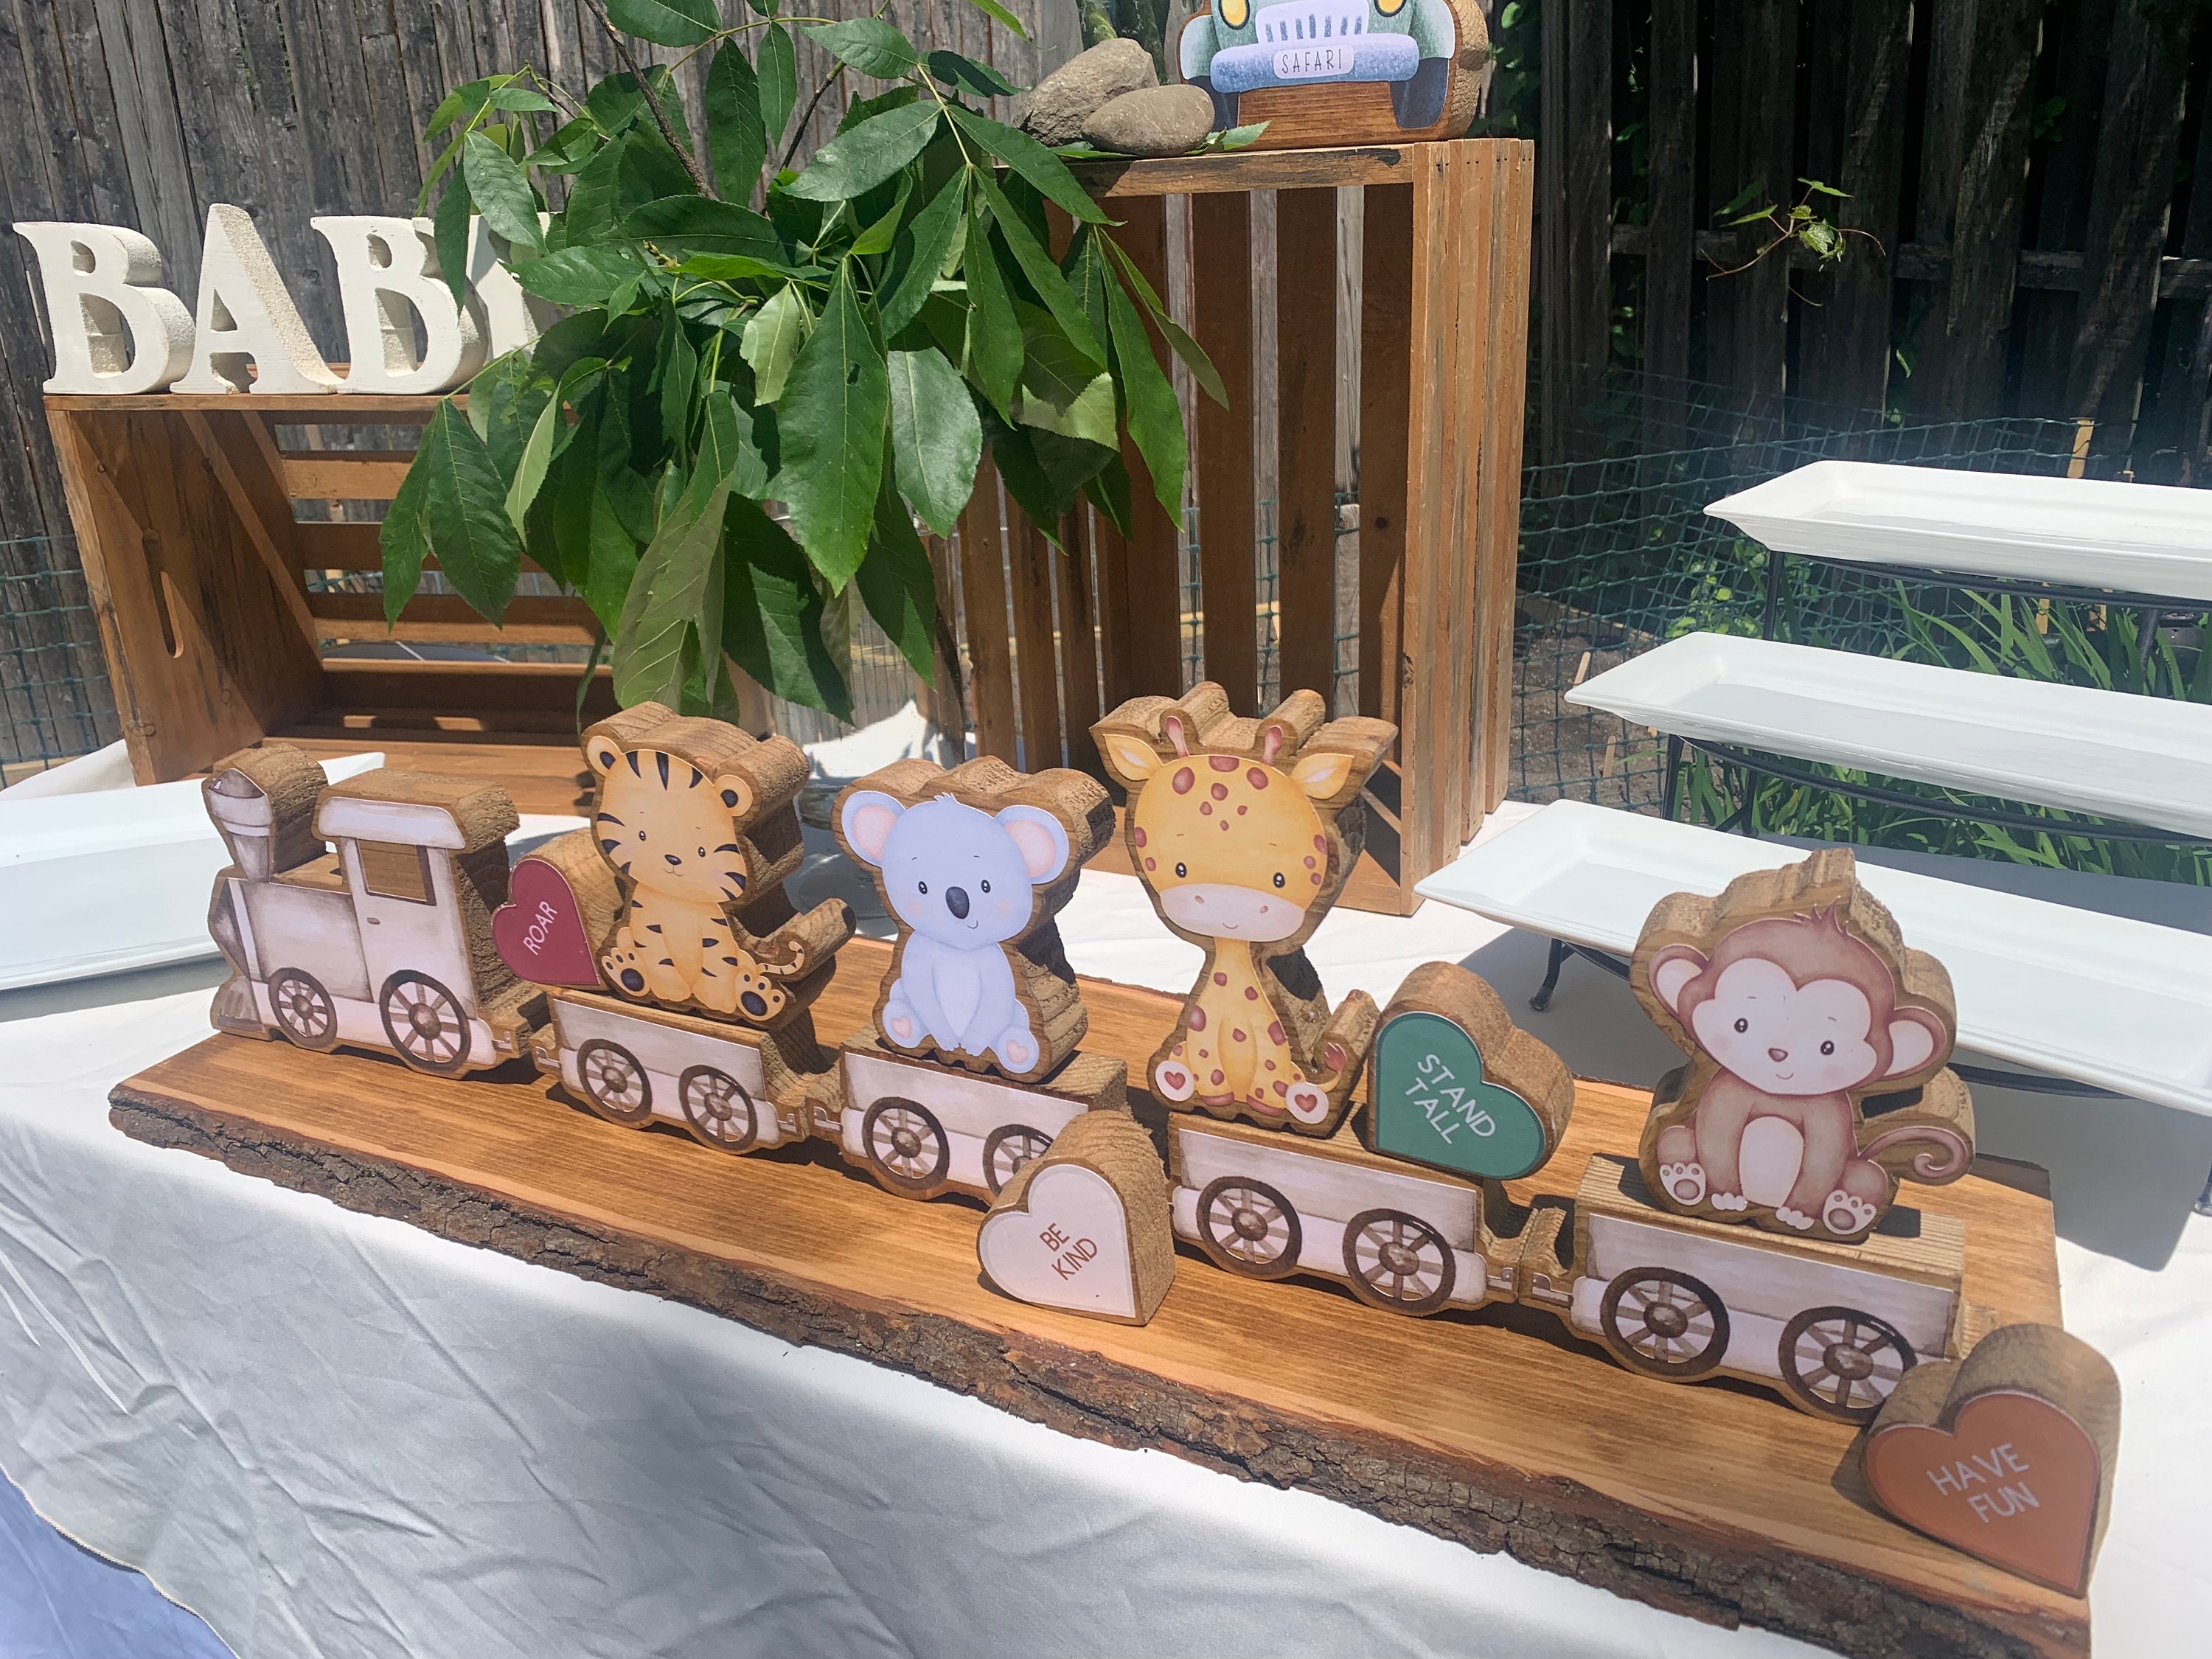 Baby Pooh Hug Centerpieces Handcrafted Wooden Set of 3-pieces of Pooh  Hugging Friends. Nursery Decor, Baby Shower and Birthday 